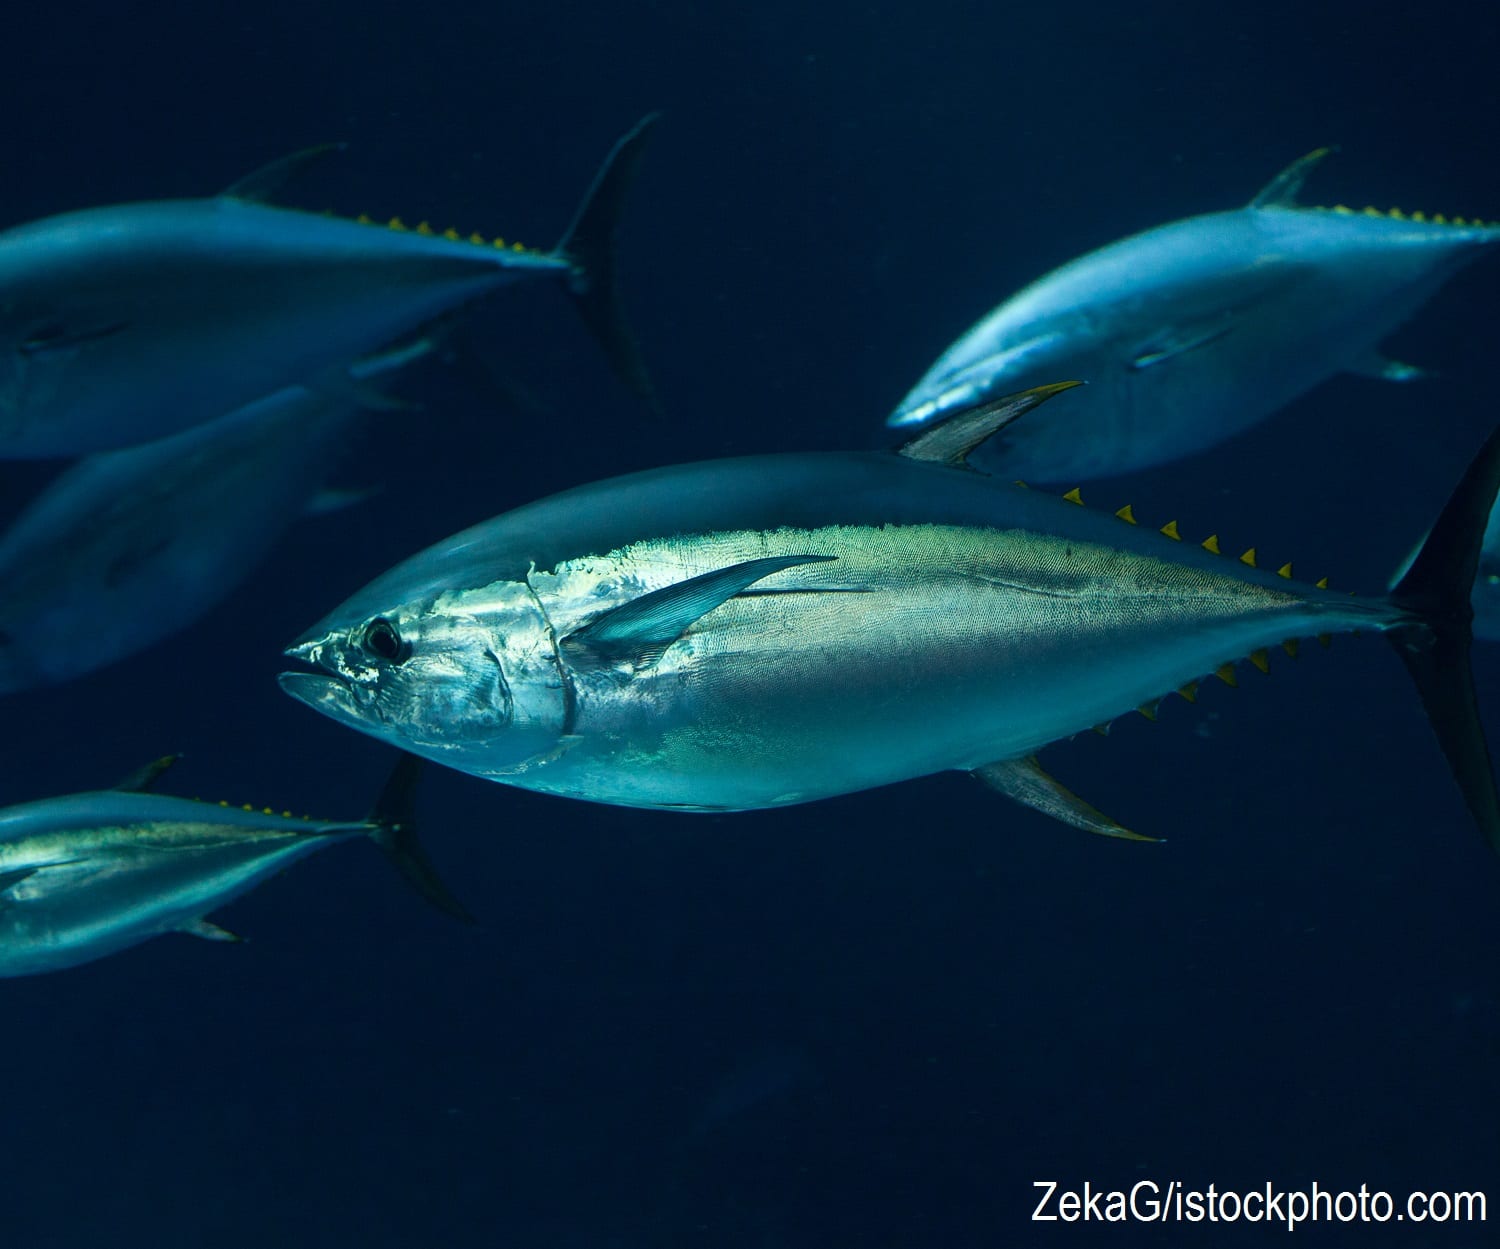 Bluefin tuna, whose overfishing is the subject of the reading.